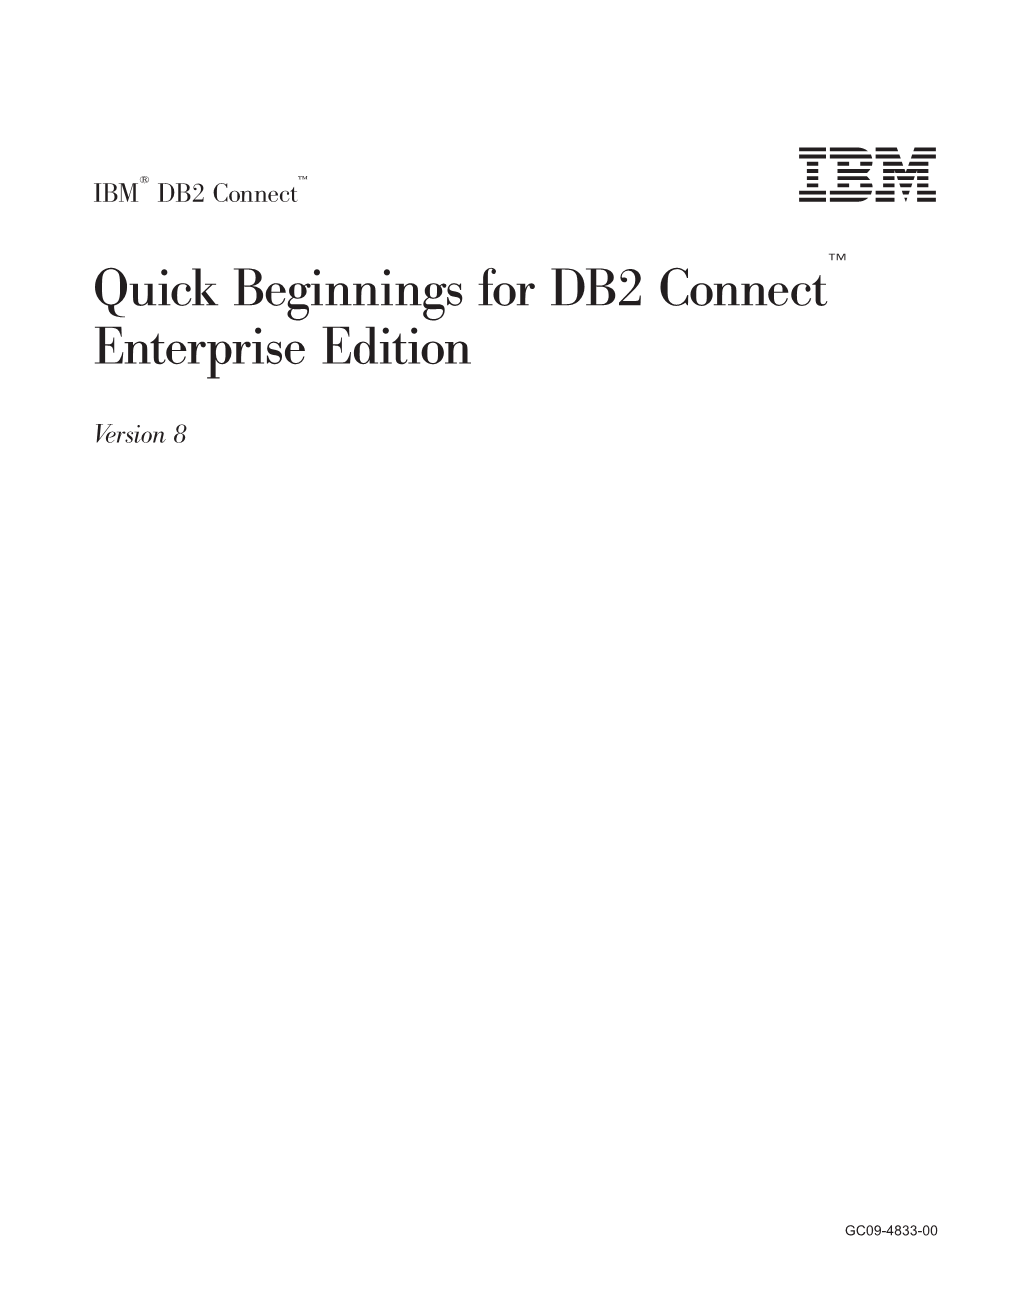 Quick Beginnings for DB2 Connect™ Enterprise Edition